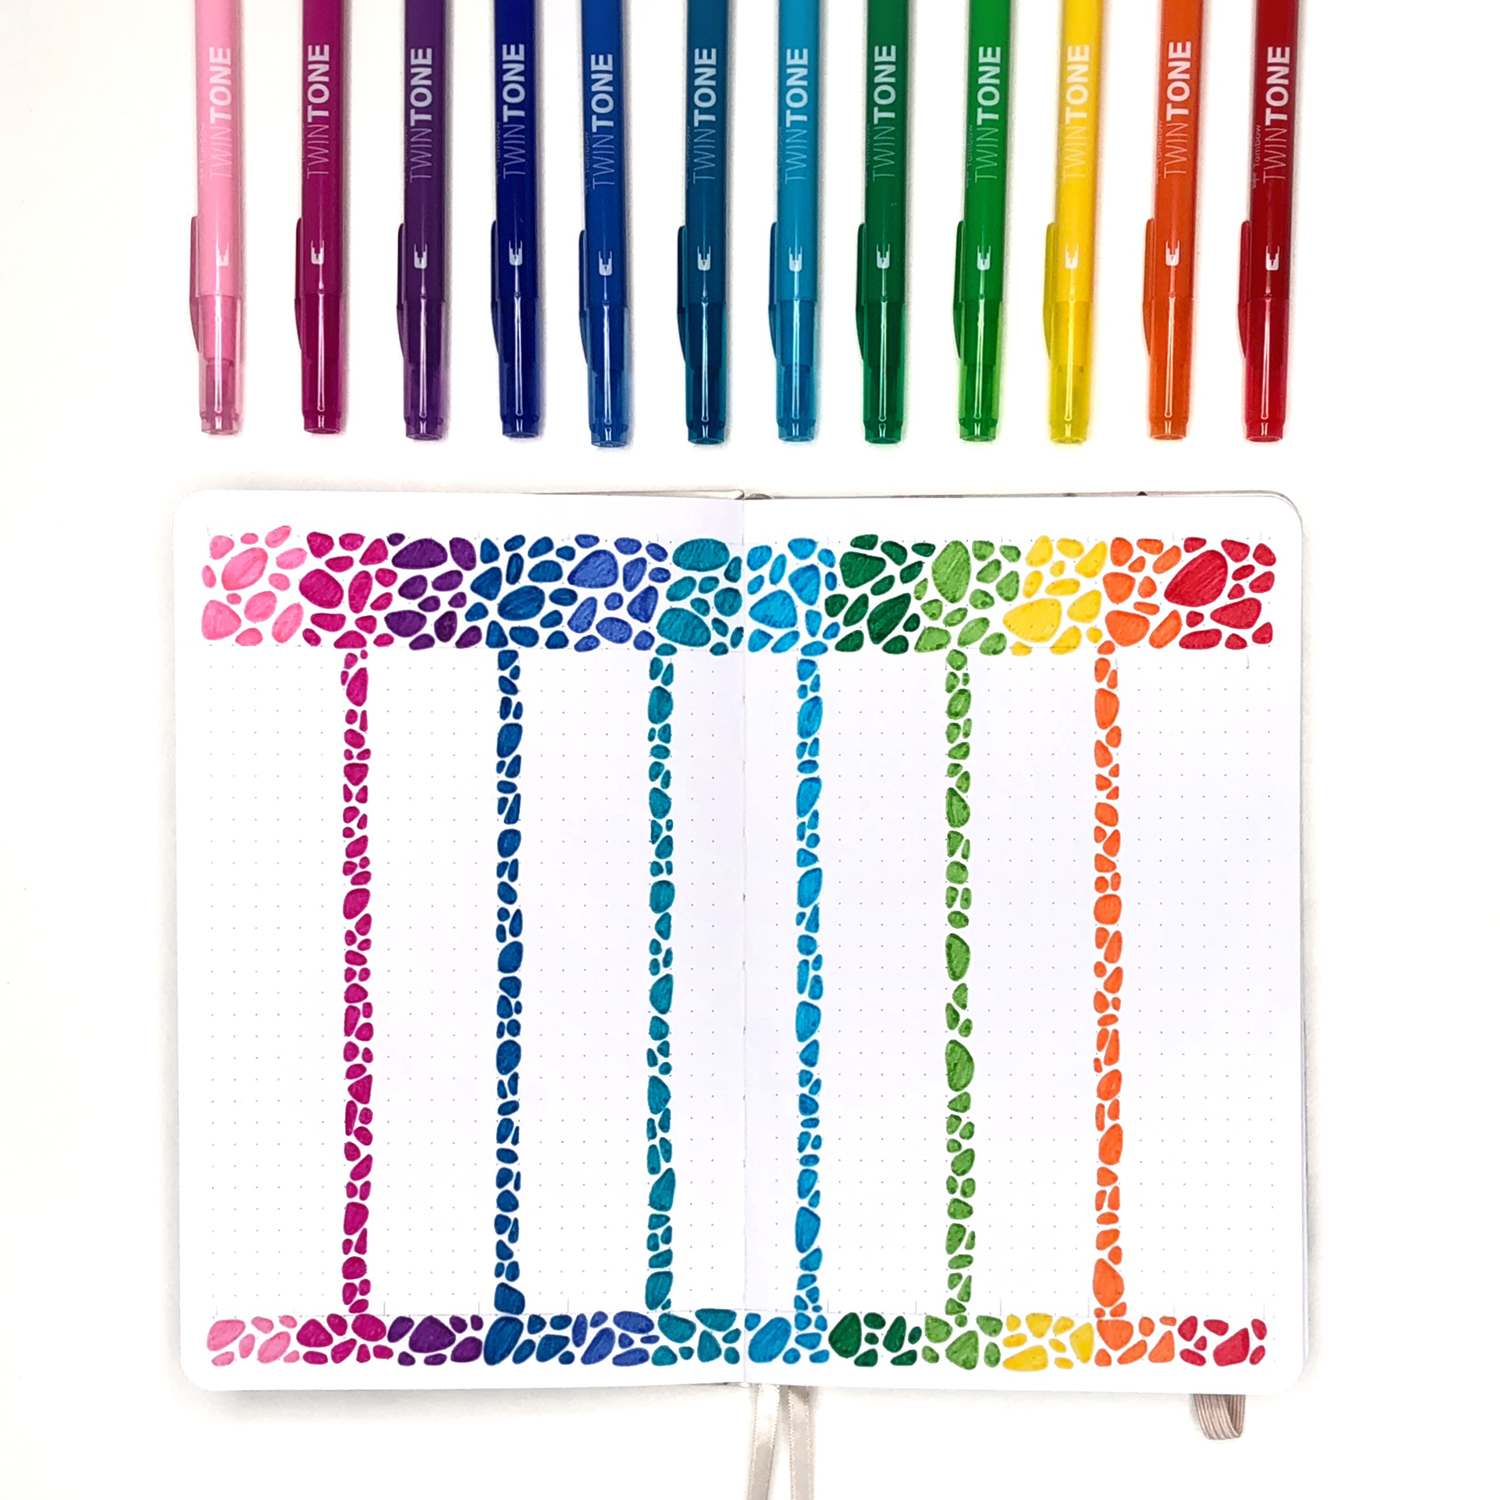 Rainbow Pebbles Planner Page by Jessica Mack on behalf of Tombow